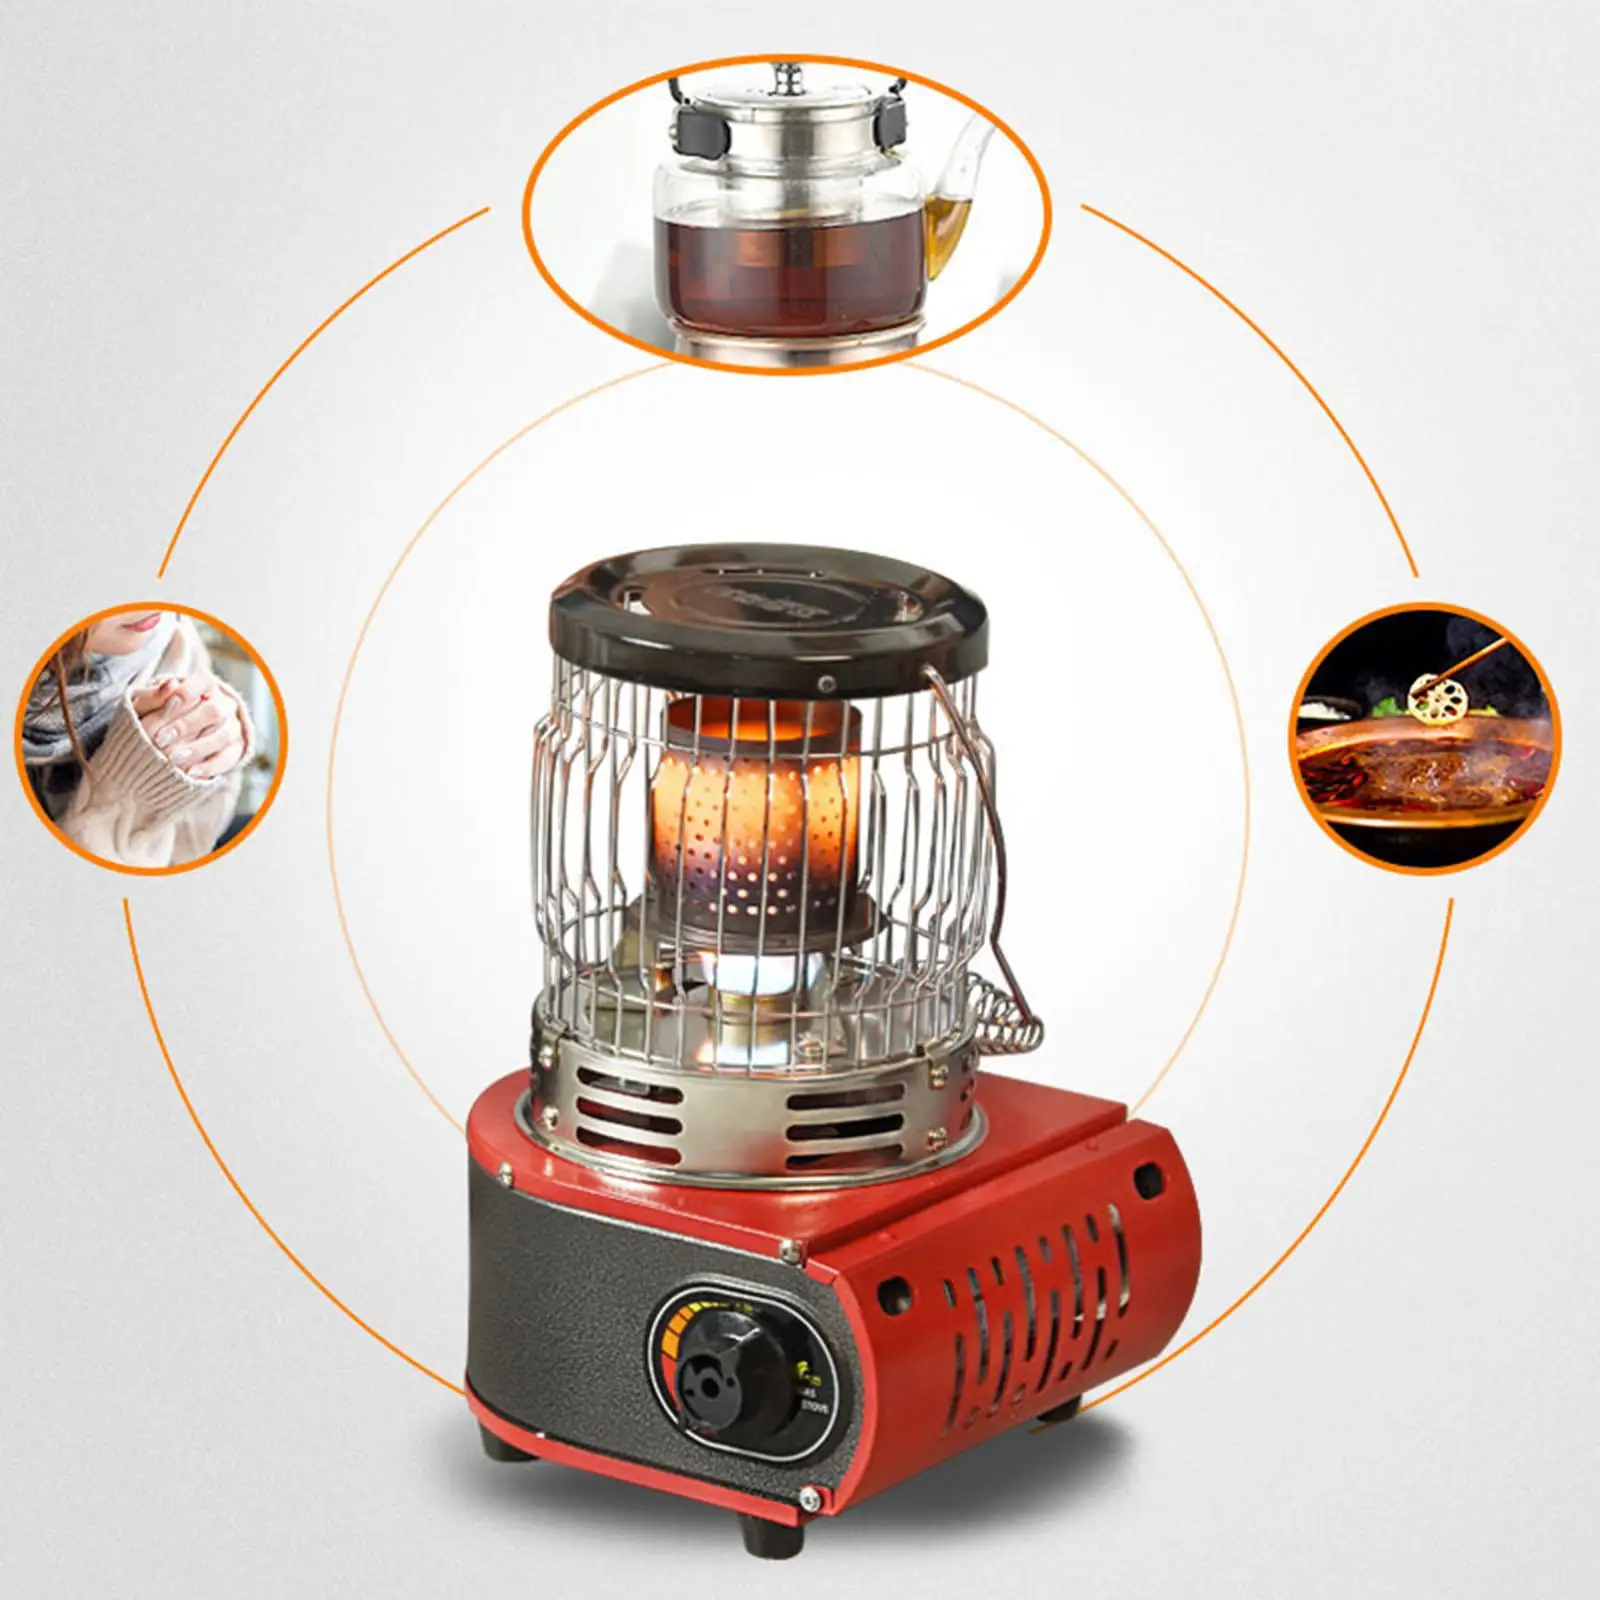 1Pc Protable Heating Stove Home Heater for Camping Tent Camp Outdoor